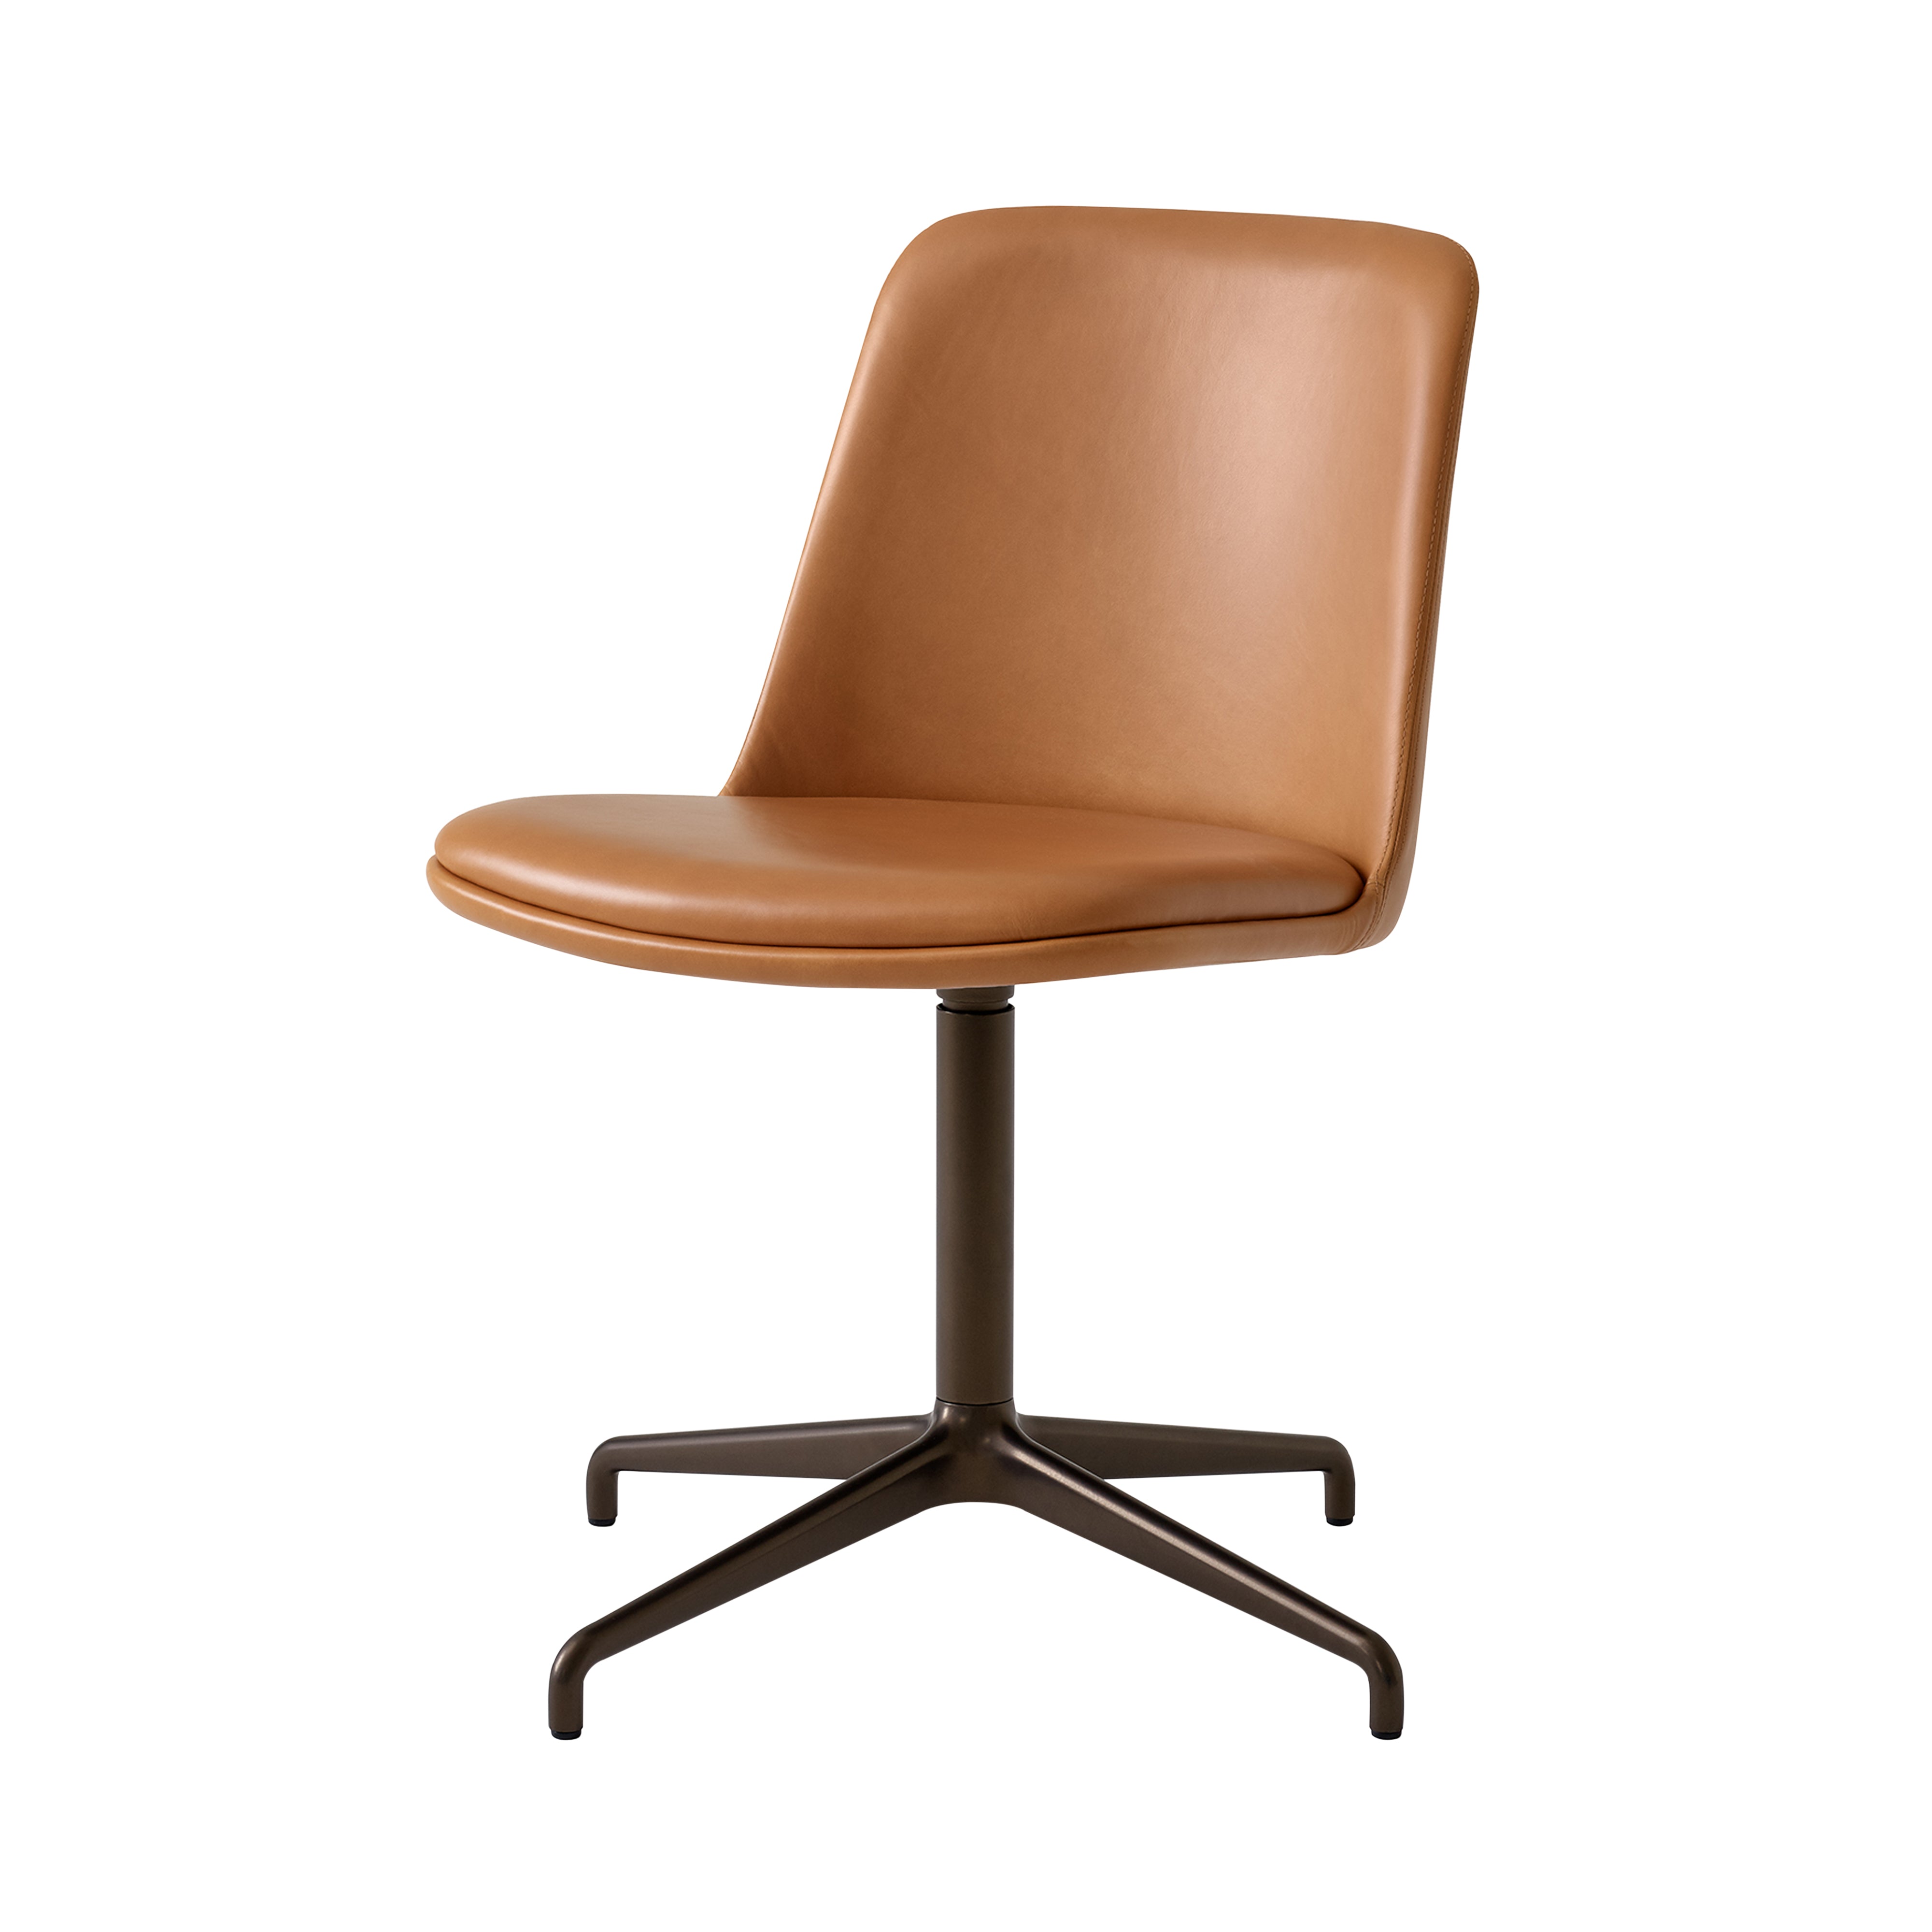 Rely Chair HW14: Bronzed